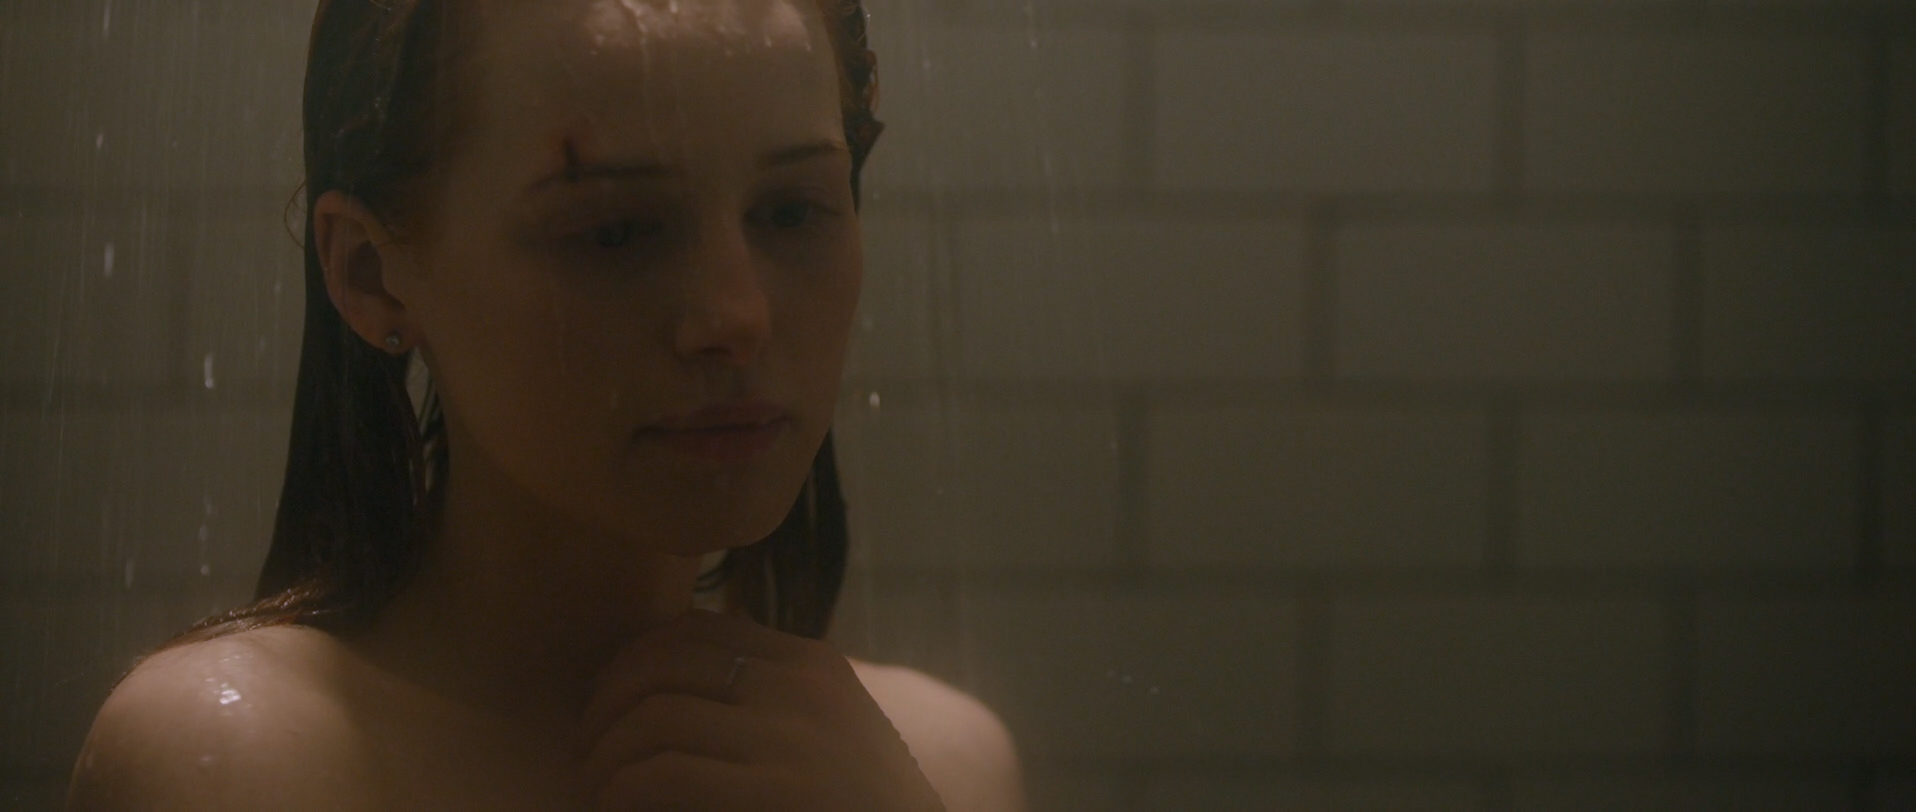 Madelaine Petsch Showing Her Wet Shoulders in an Angsty Shower Scene